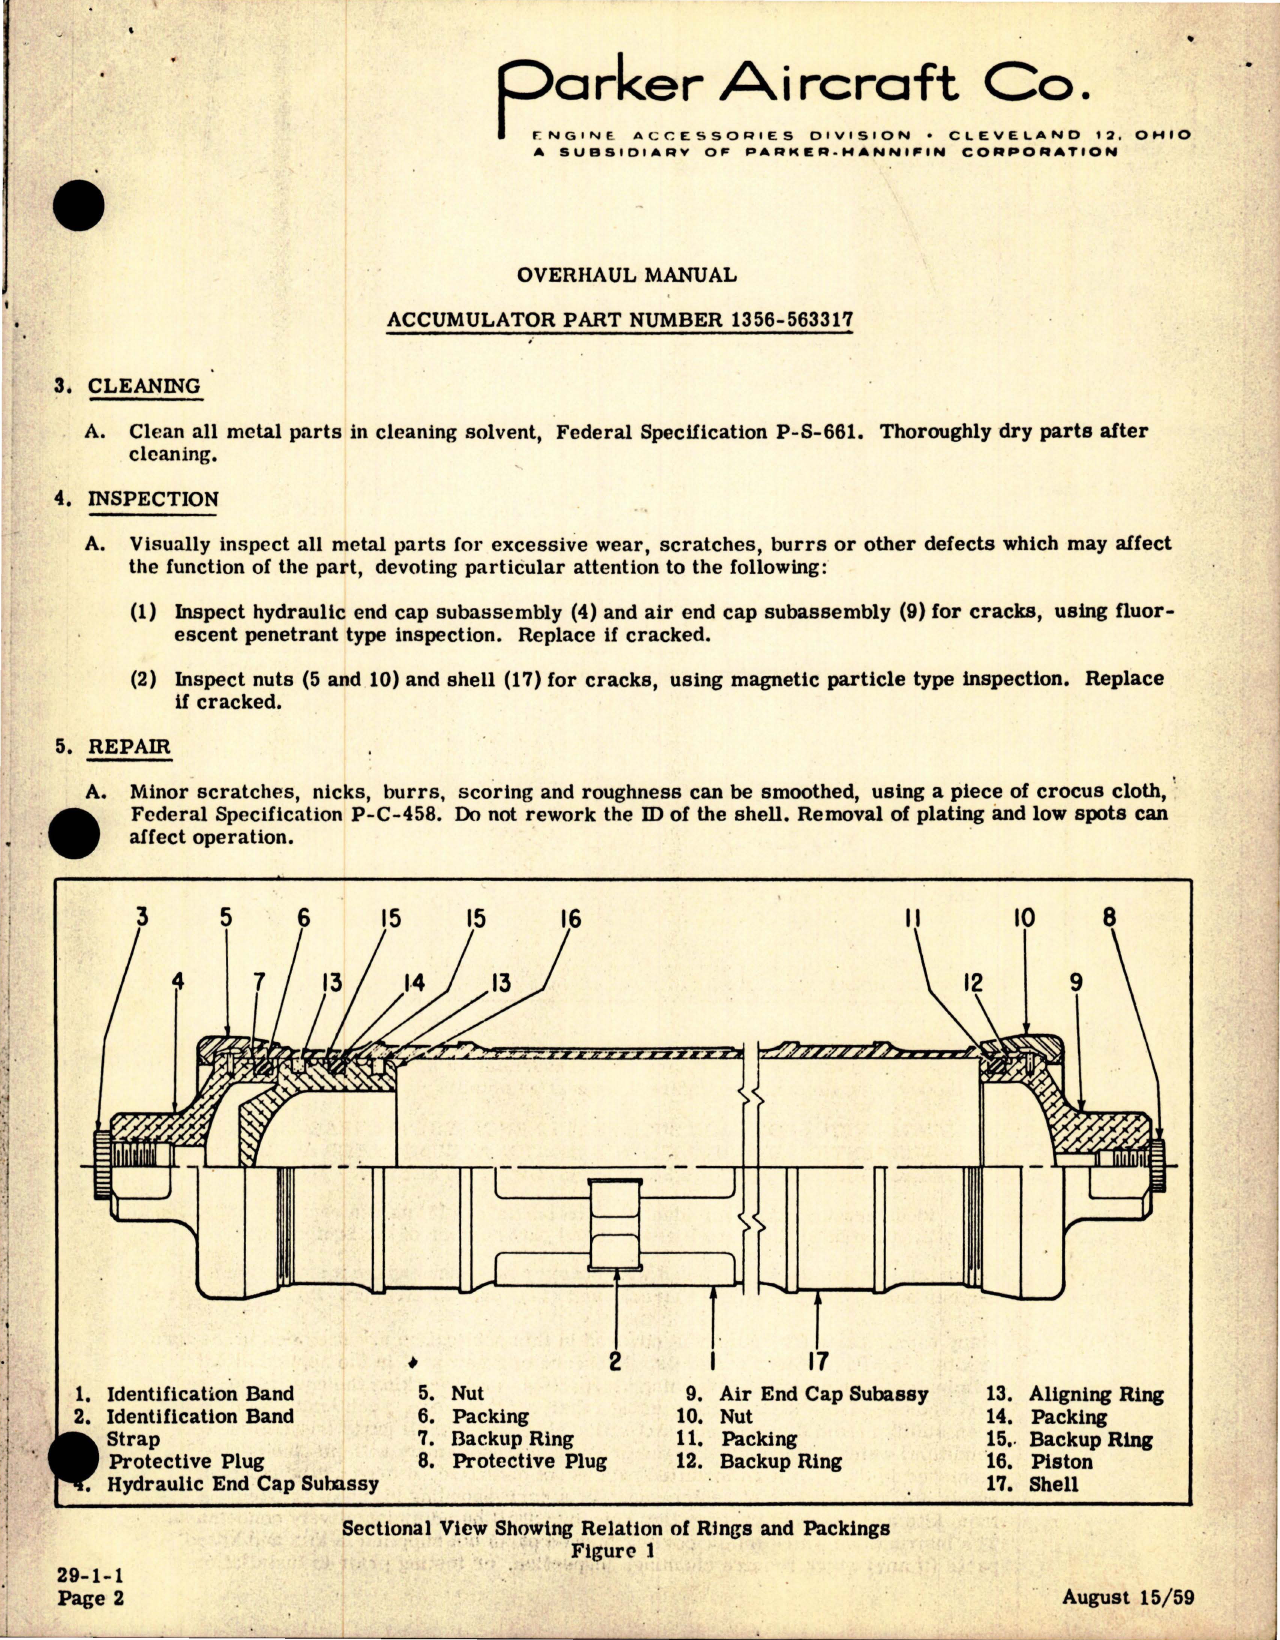 Sample page 7 from AirCorps Library document: Overhaul Manual with Parts List for Hydraulic Power Accumulator - Part 1356-563317 